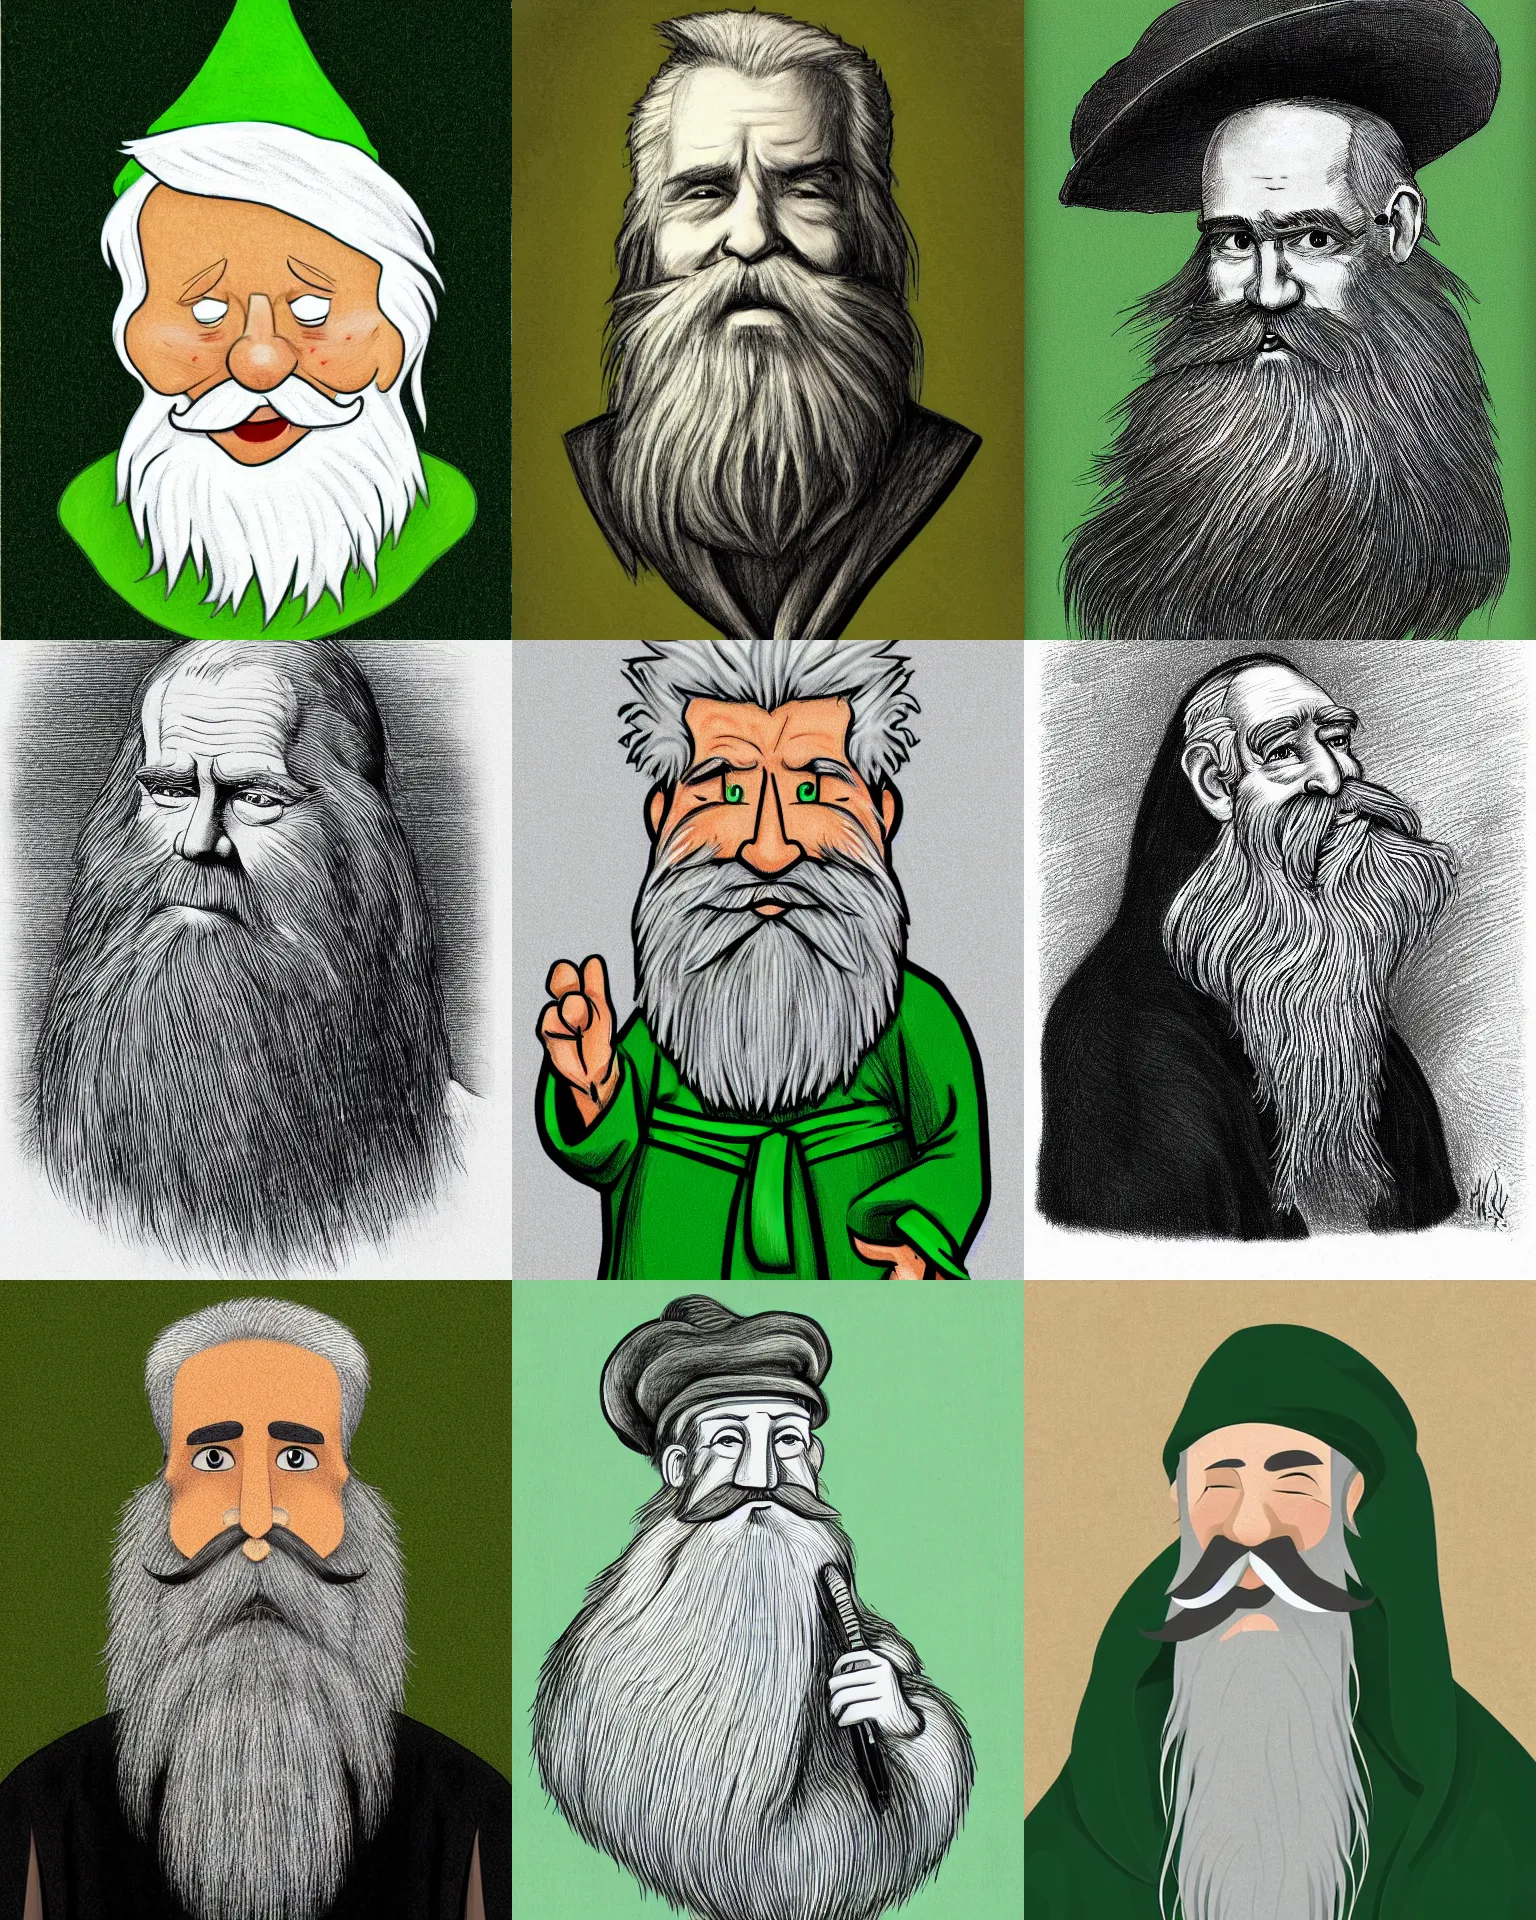 Prompt: horace croon old man white hair long beard, simple character drawing, green robe